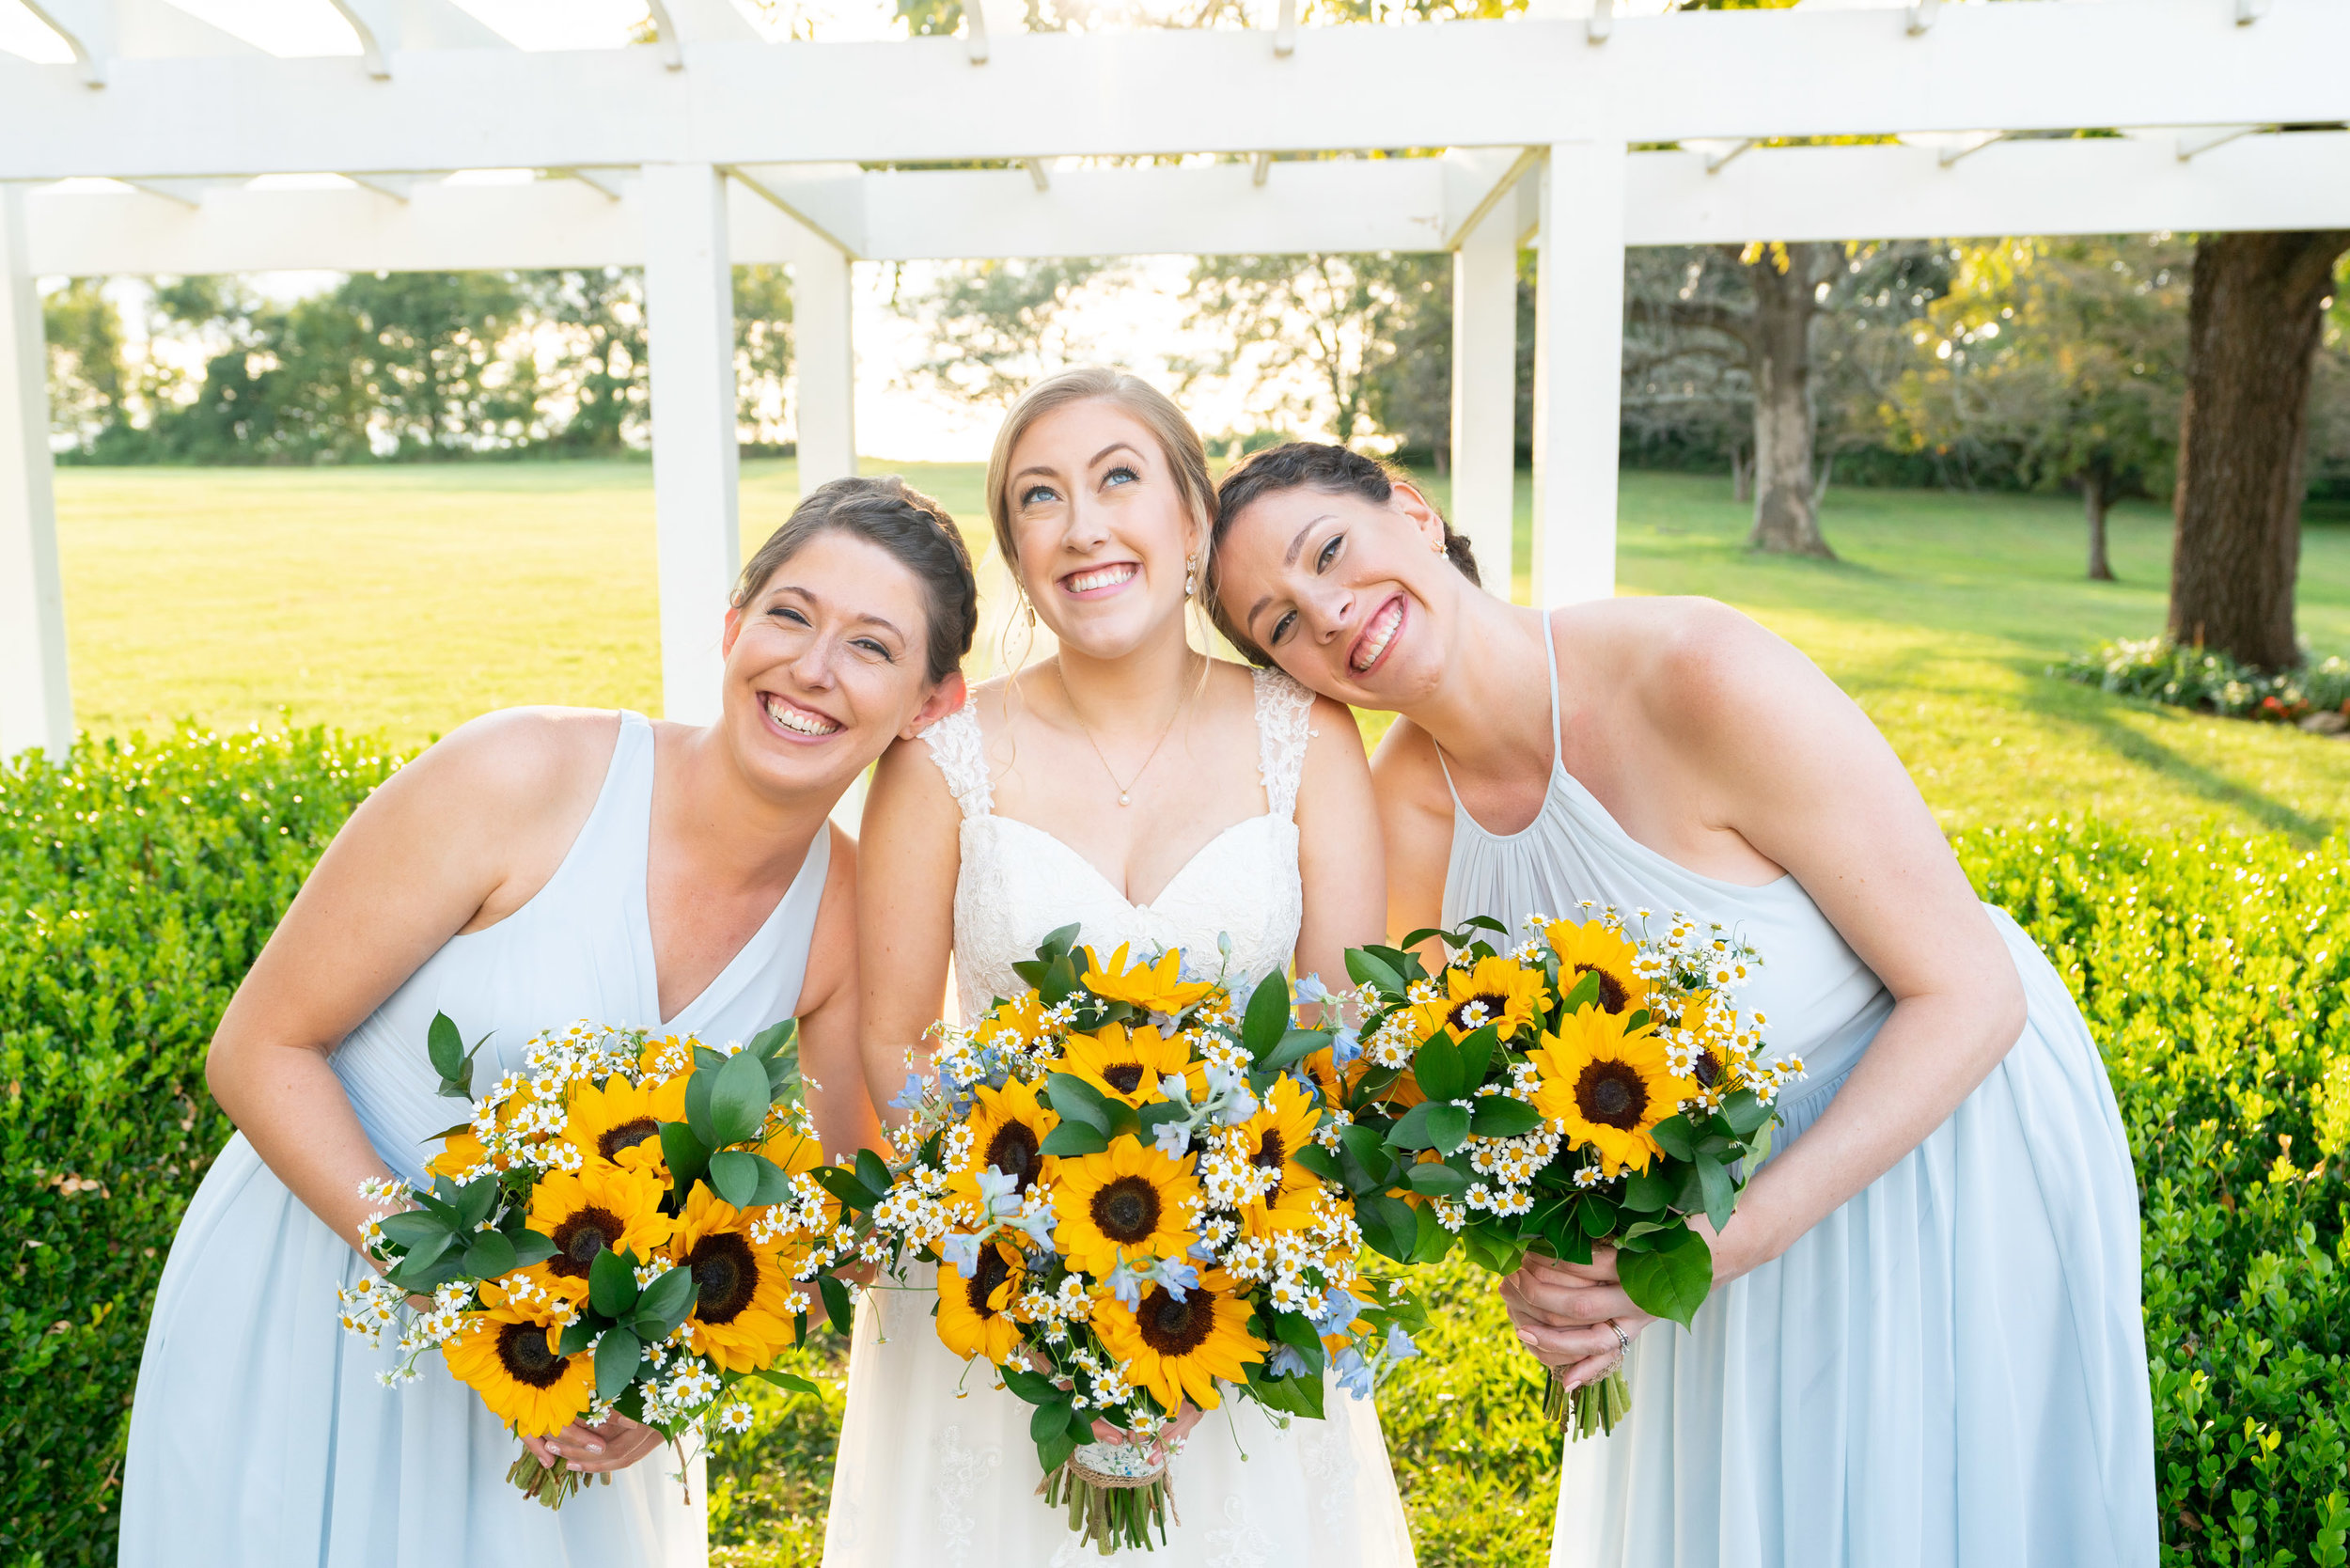 Bride and bridesmaids in blue azazie and sunflower bouquets at Frederick wedding venue